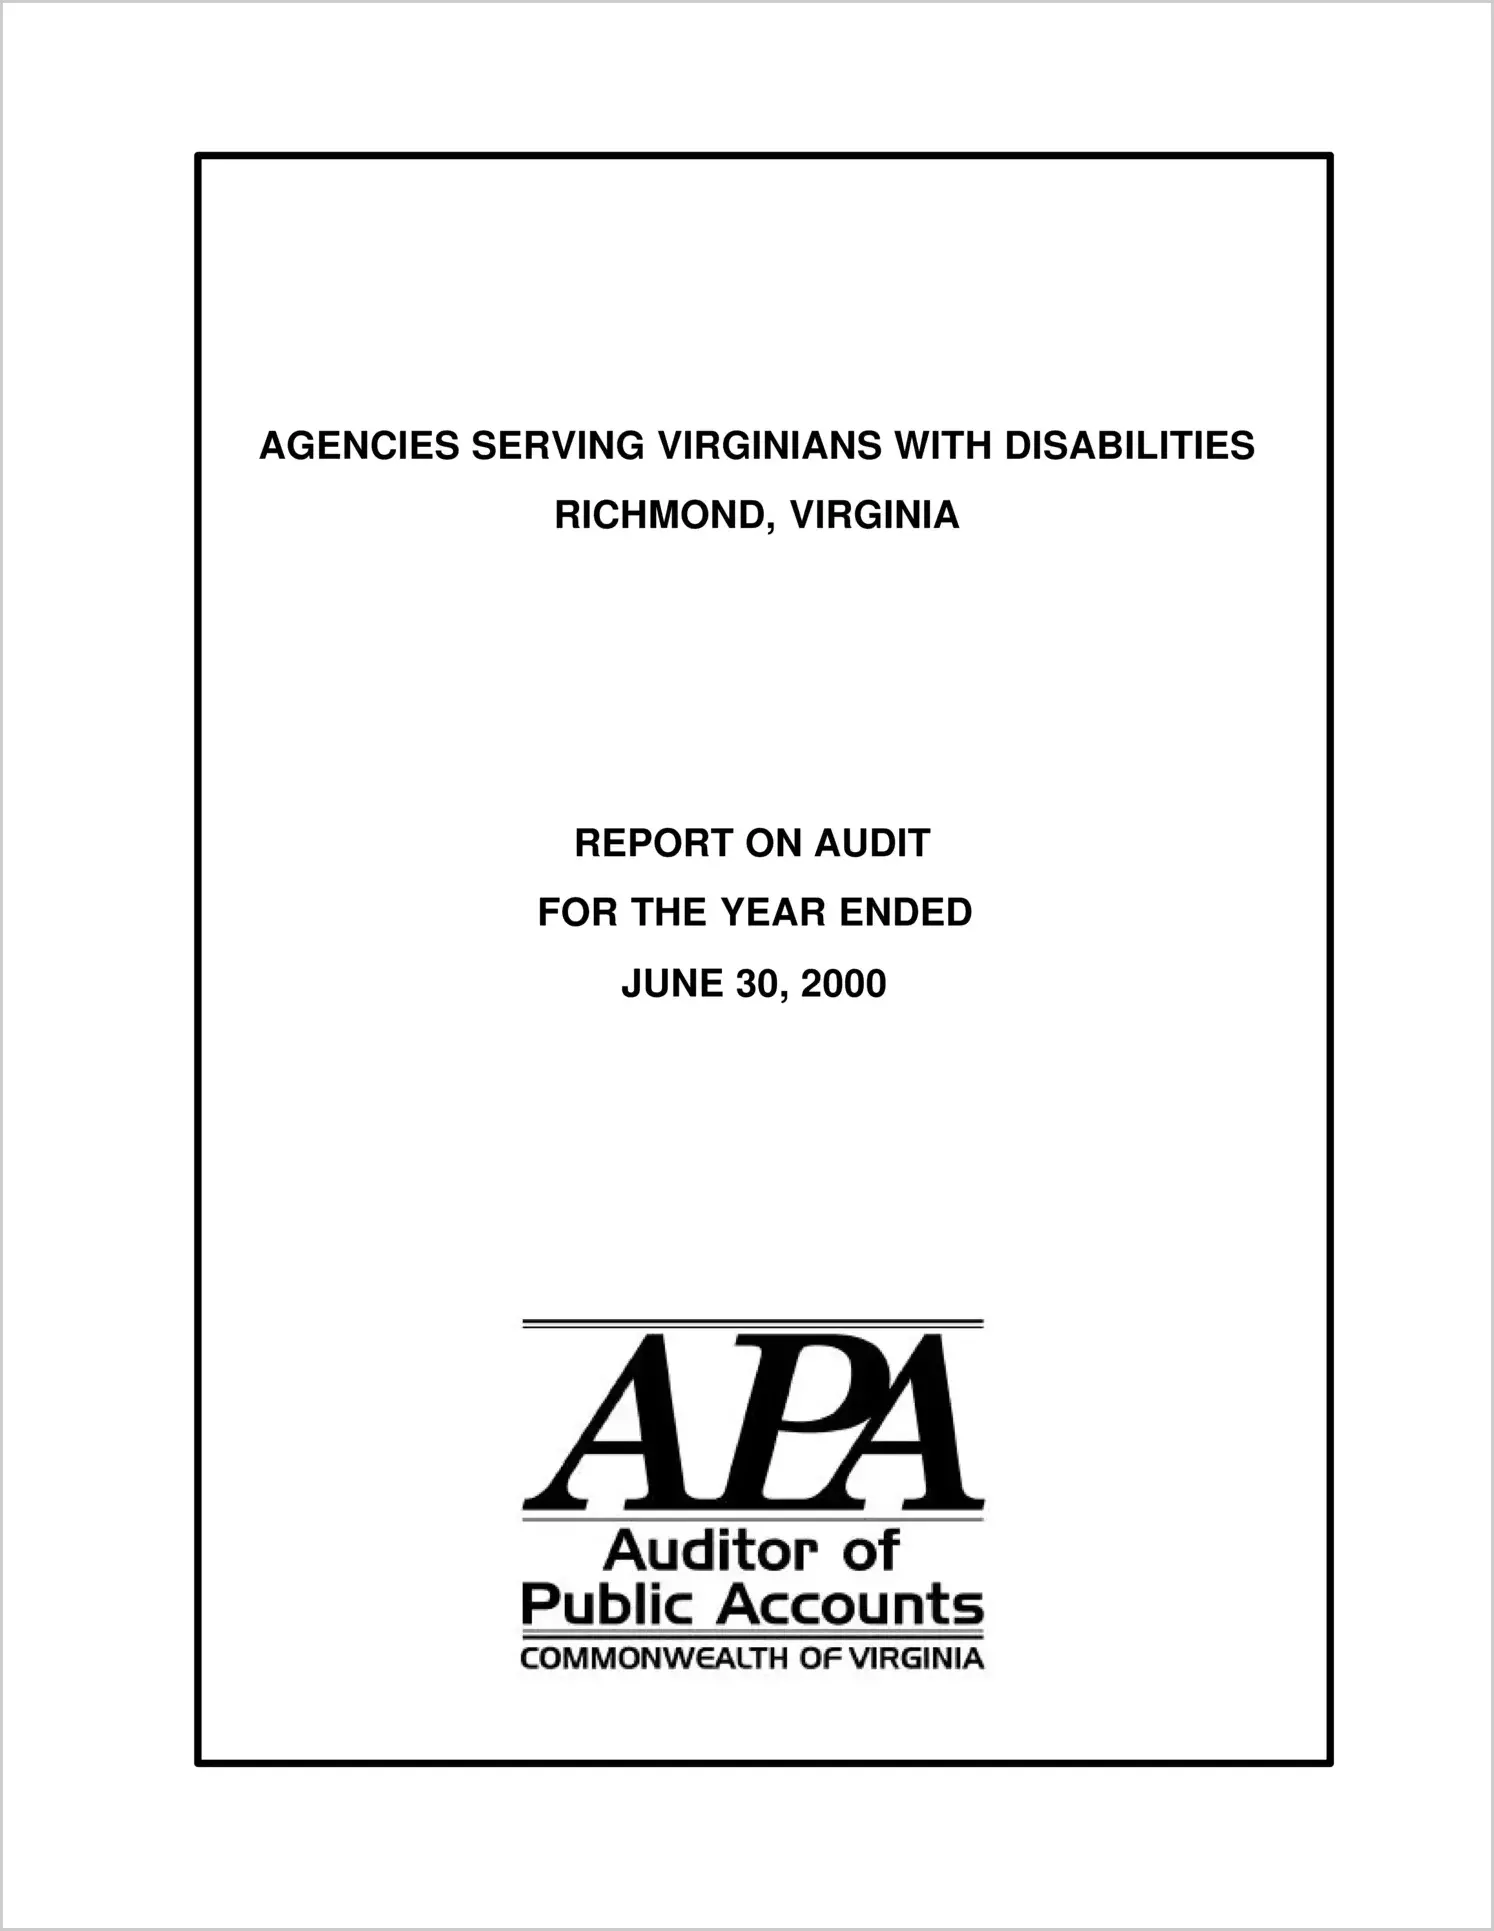 Agencies Serving Virginians with Disabilities for the year ended June 30, 2000